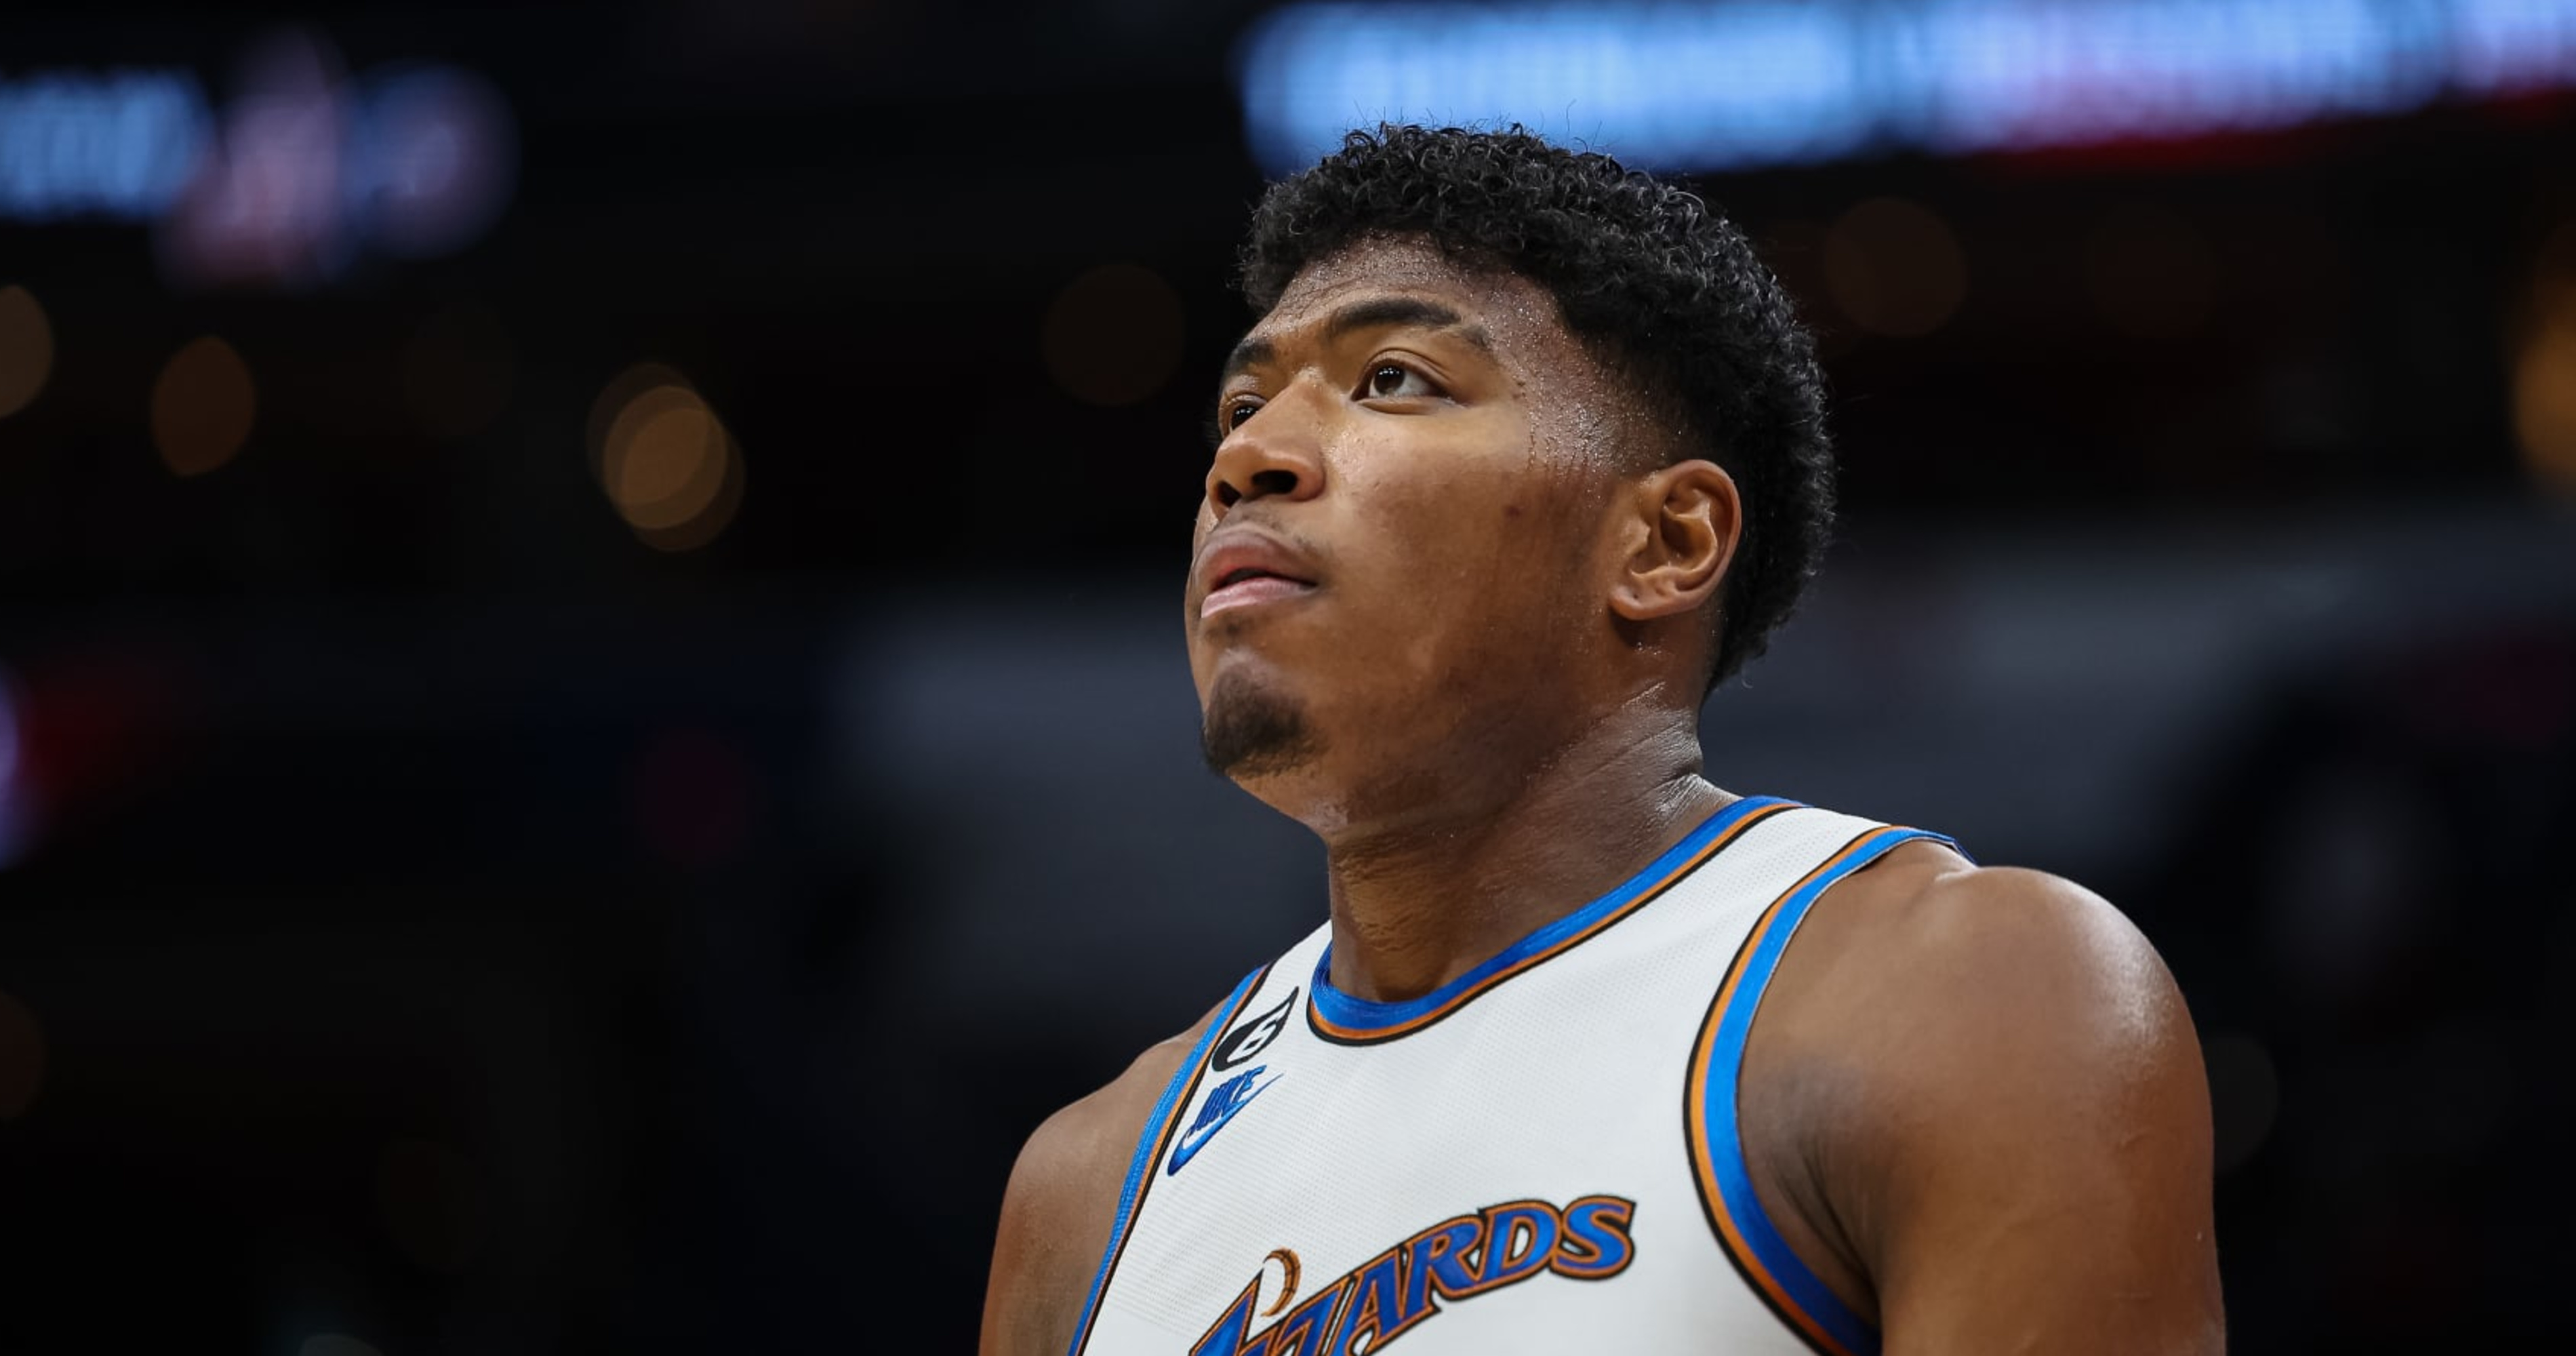 Buha: Rui Hachimura is projected to start for the Lakers this season